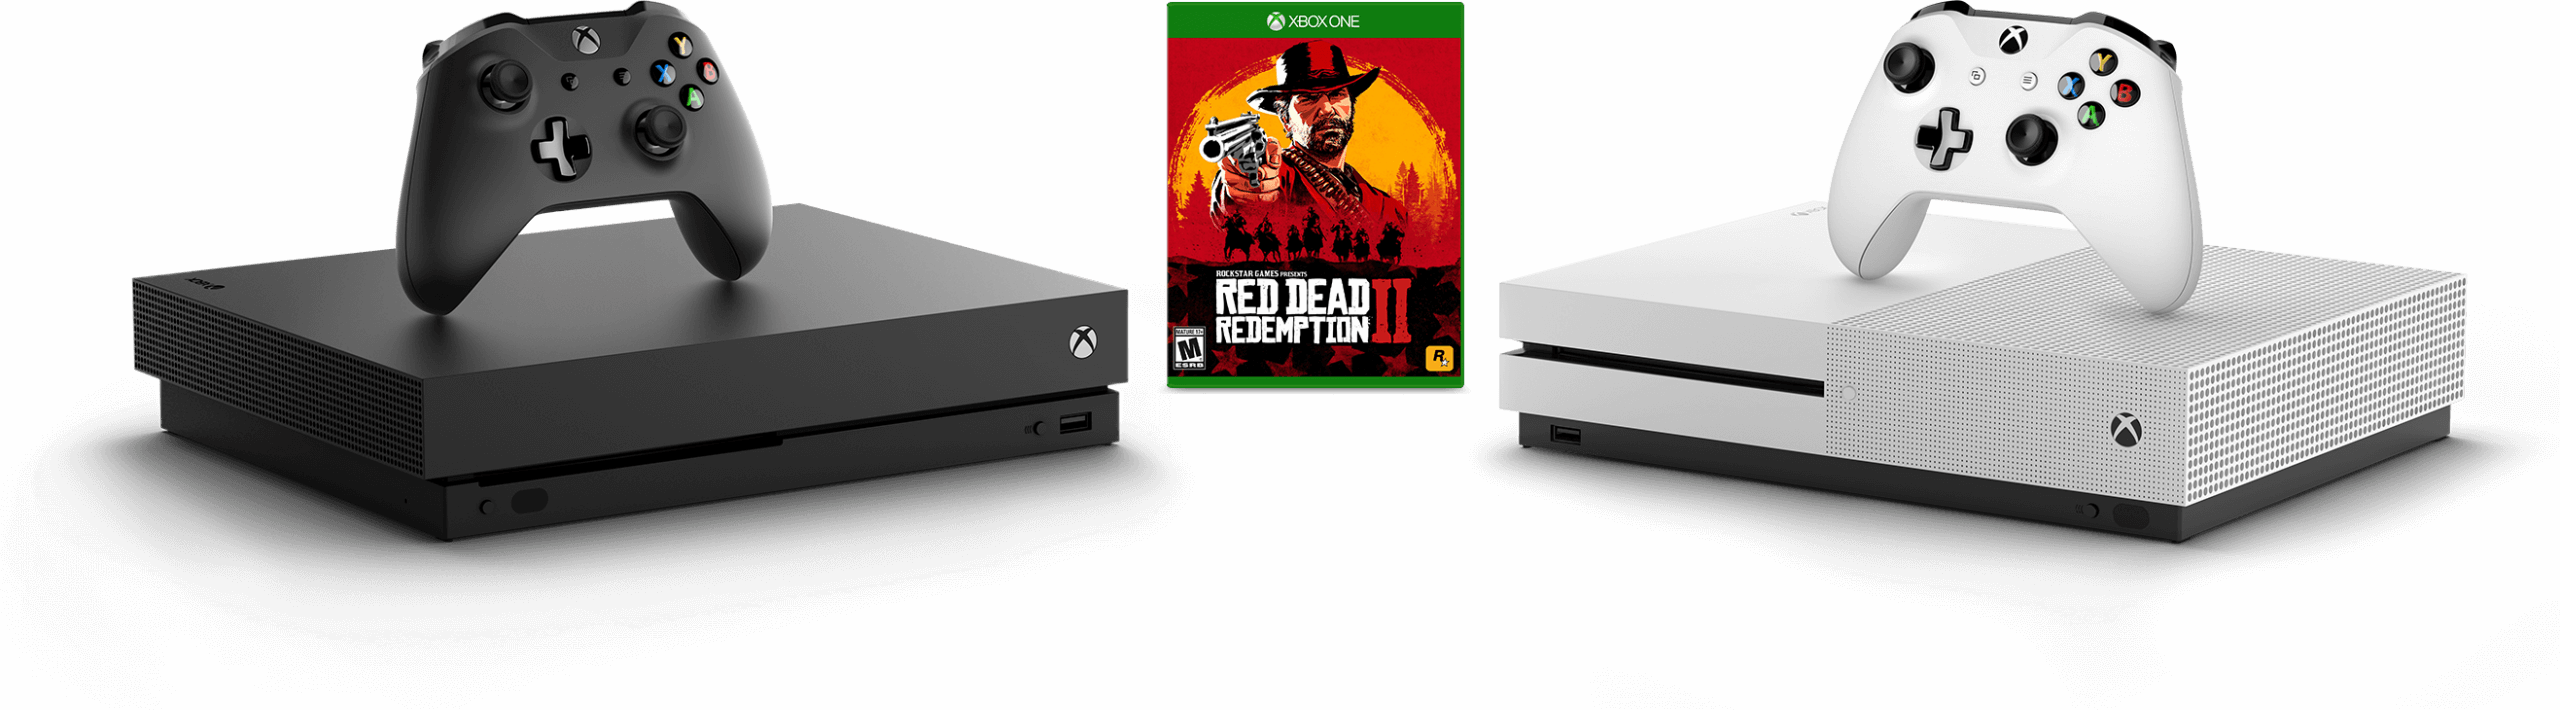 Grand Heap of terrorist Microsoft giving $100 off Xbox One S and X with purchase of Red Dead  Redemption 2 | TechSpot